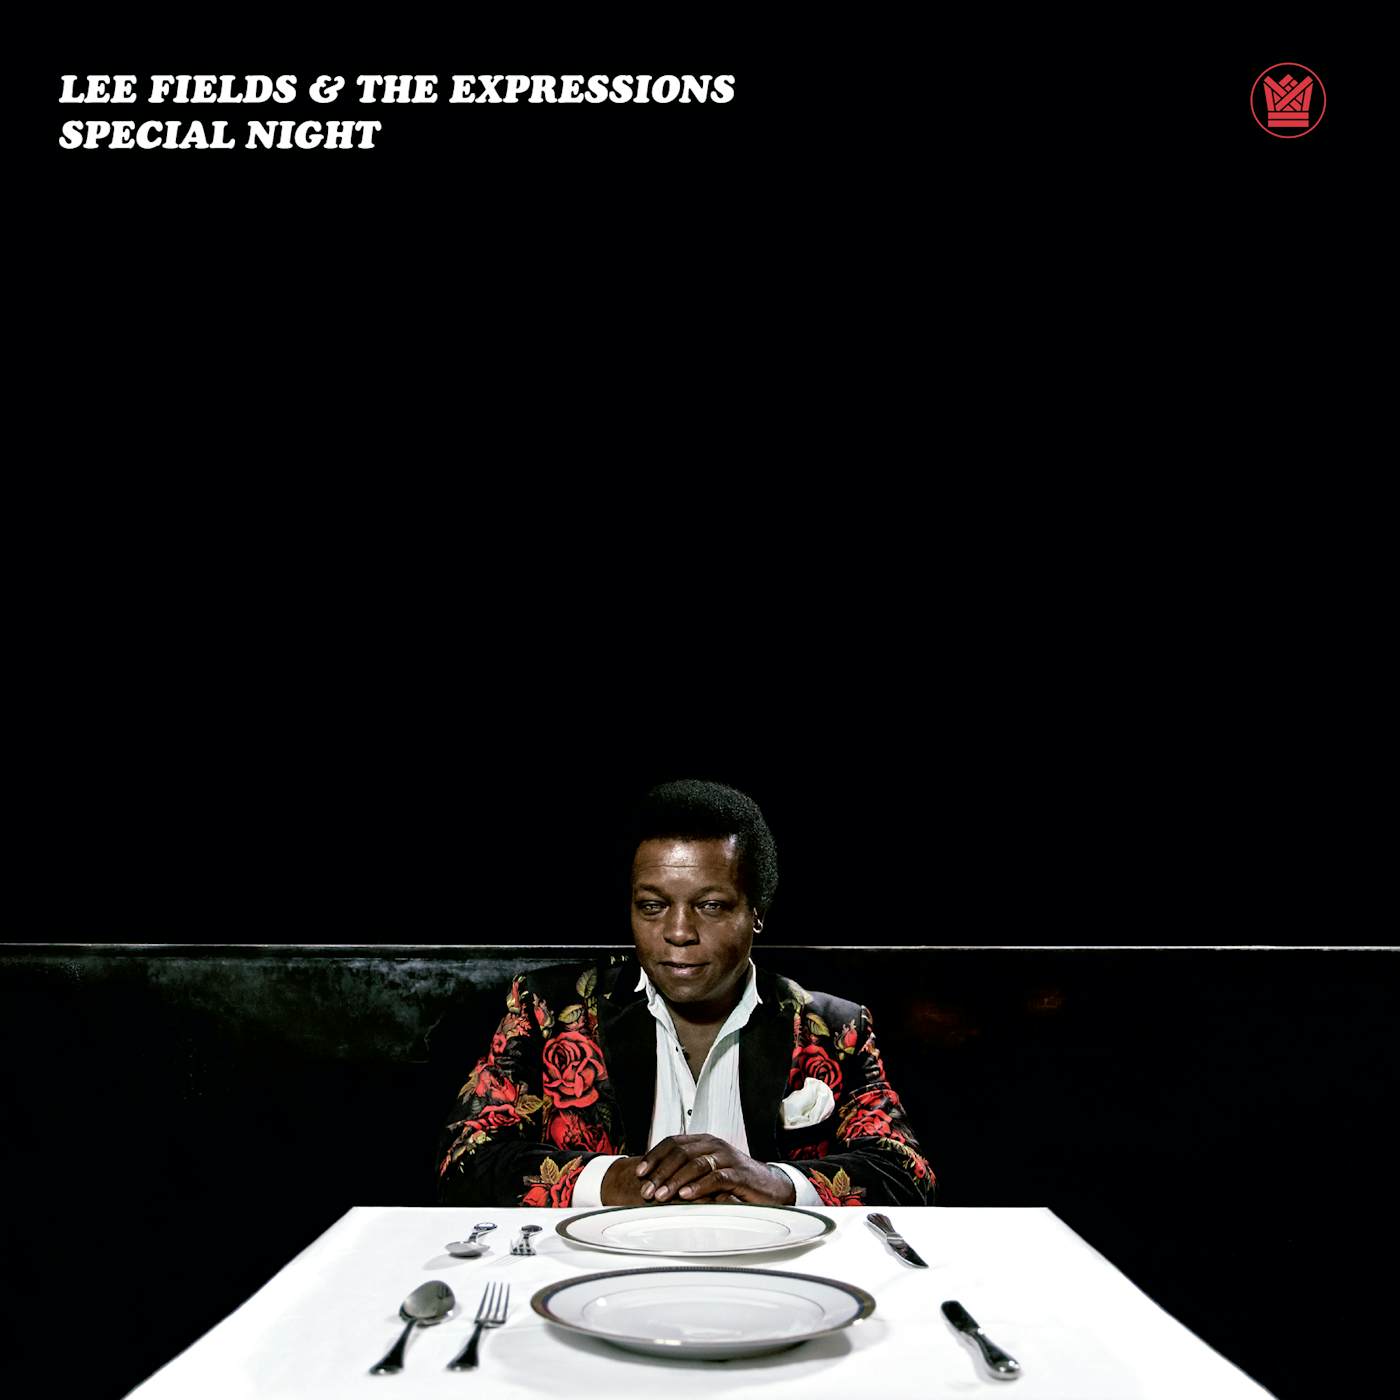 Lee Fields & The Expressions Special Night Vinyl Record